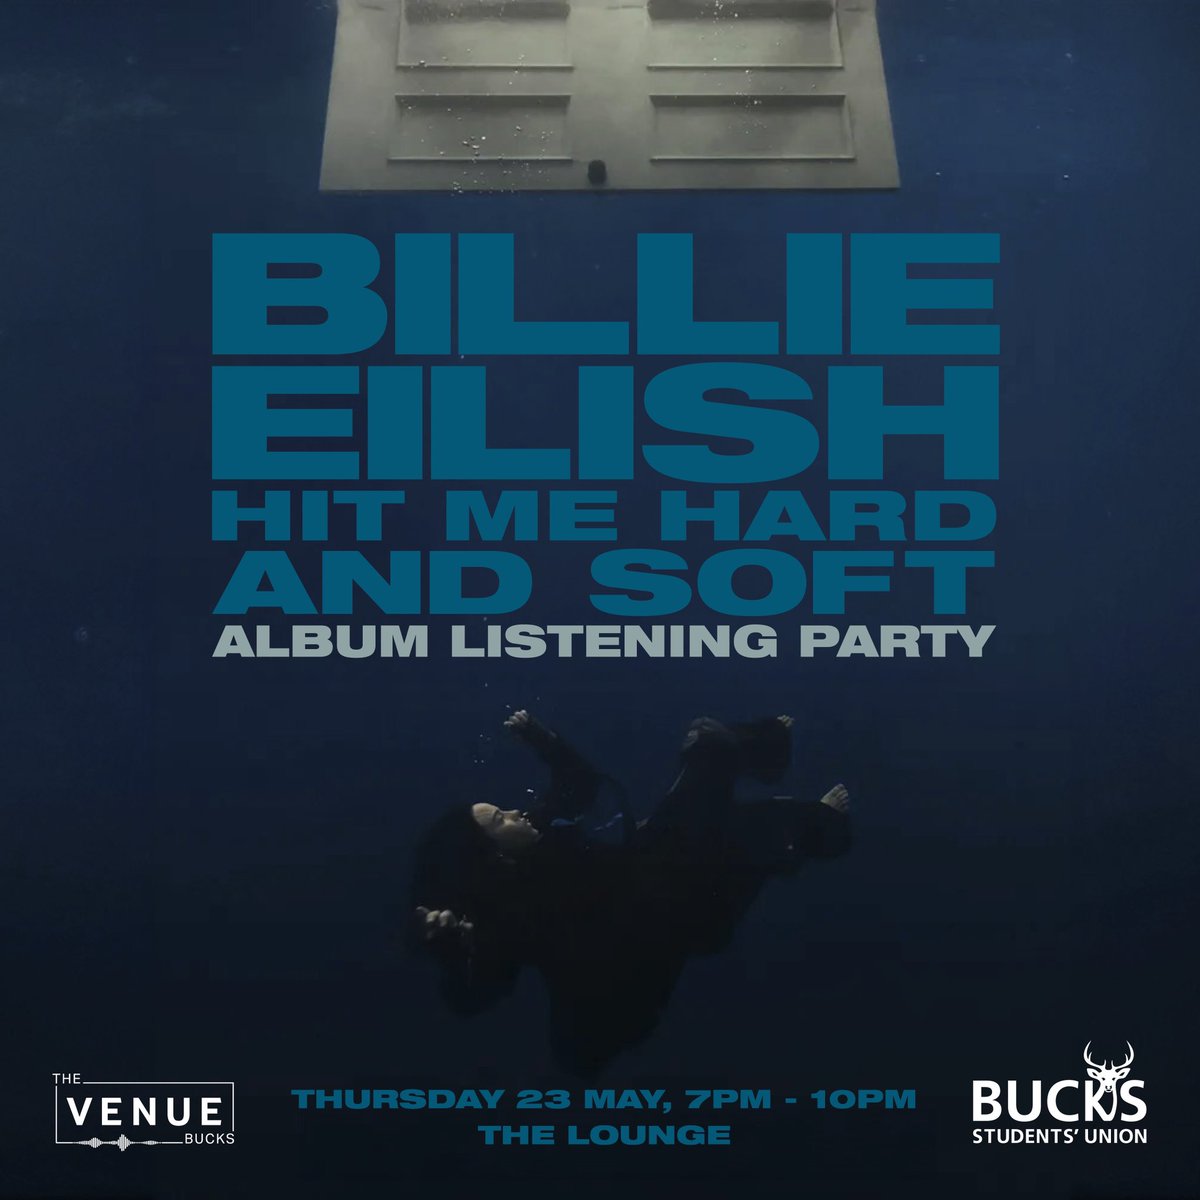 Calling all Billie Eilish fans 📢 One night dedicated to her brand new album ‘Hit Me Hard And Soft’ 😍 With great music, snacks and unbeatable drinks deals, where else would you want to listening to it? 📅Thursday 23 May ⏰7pm - 10pm 📍The Lounge